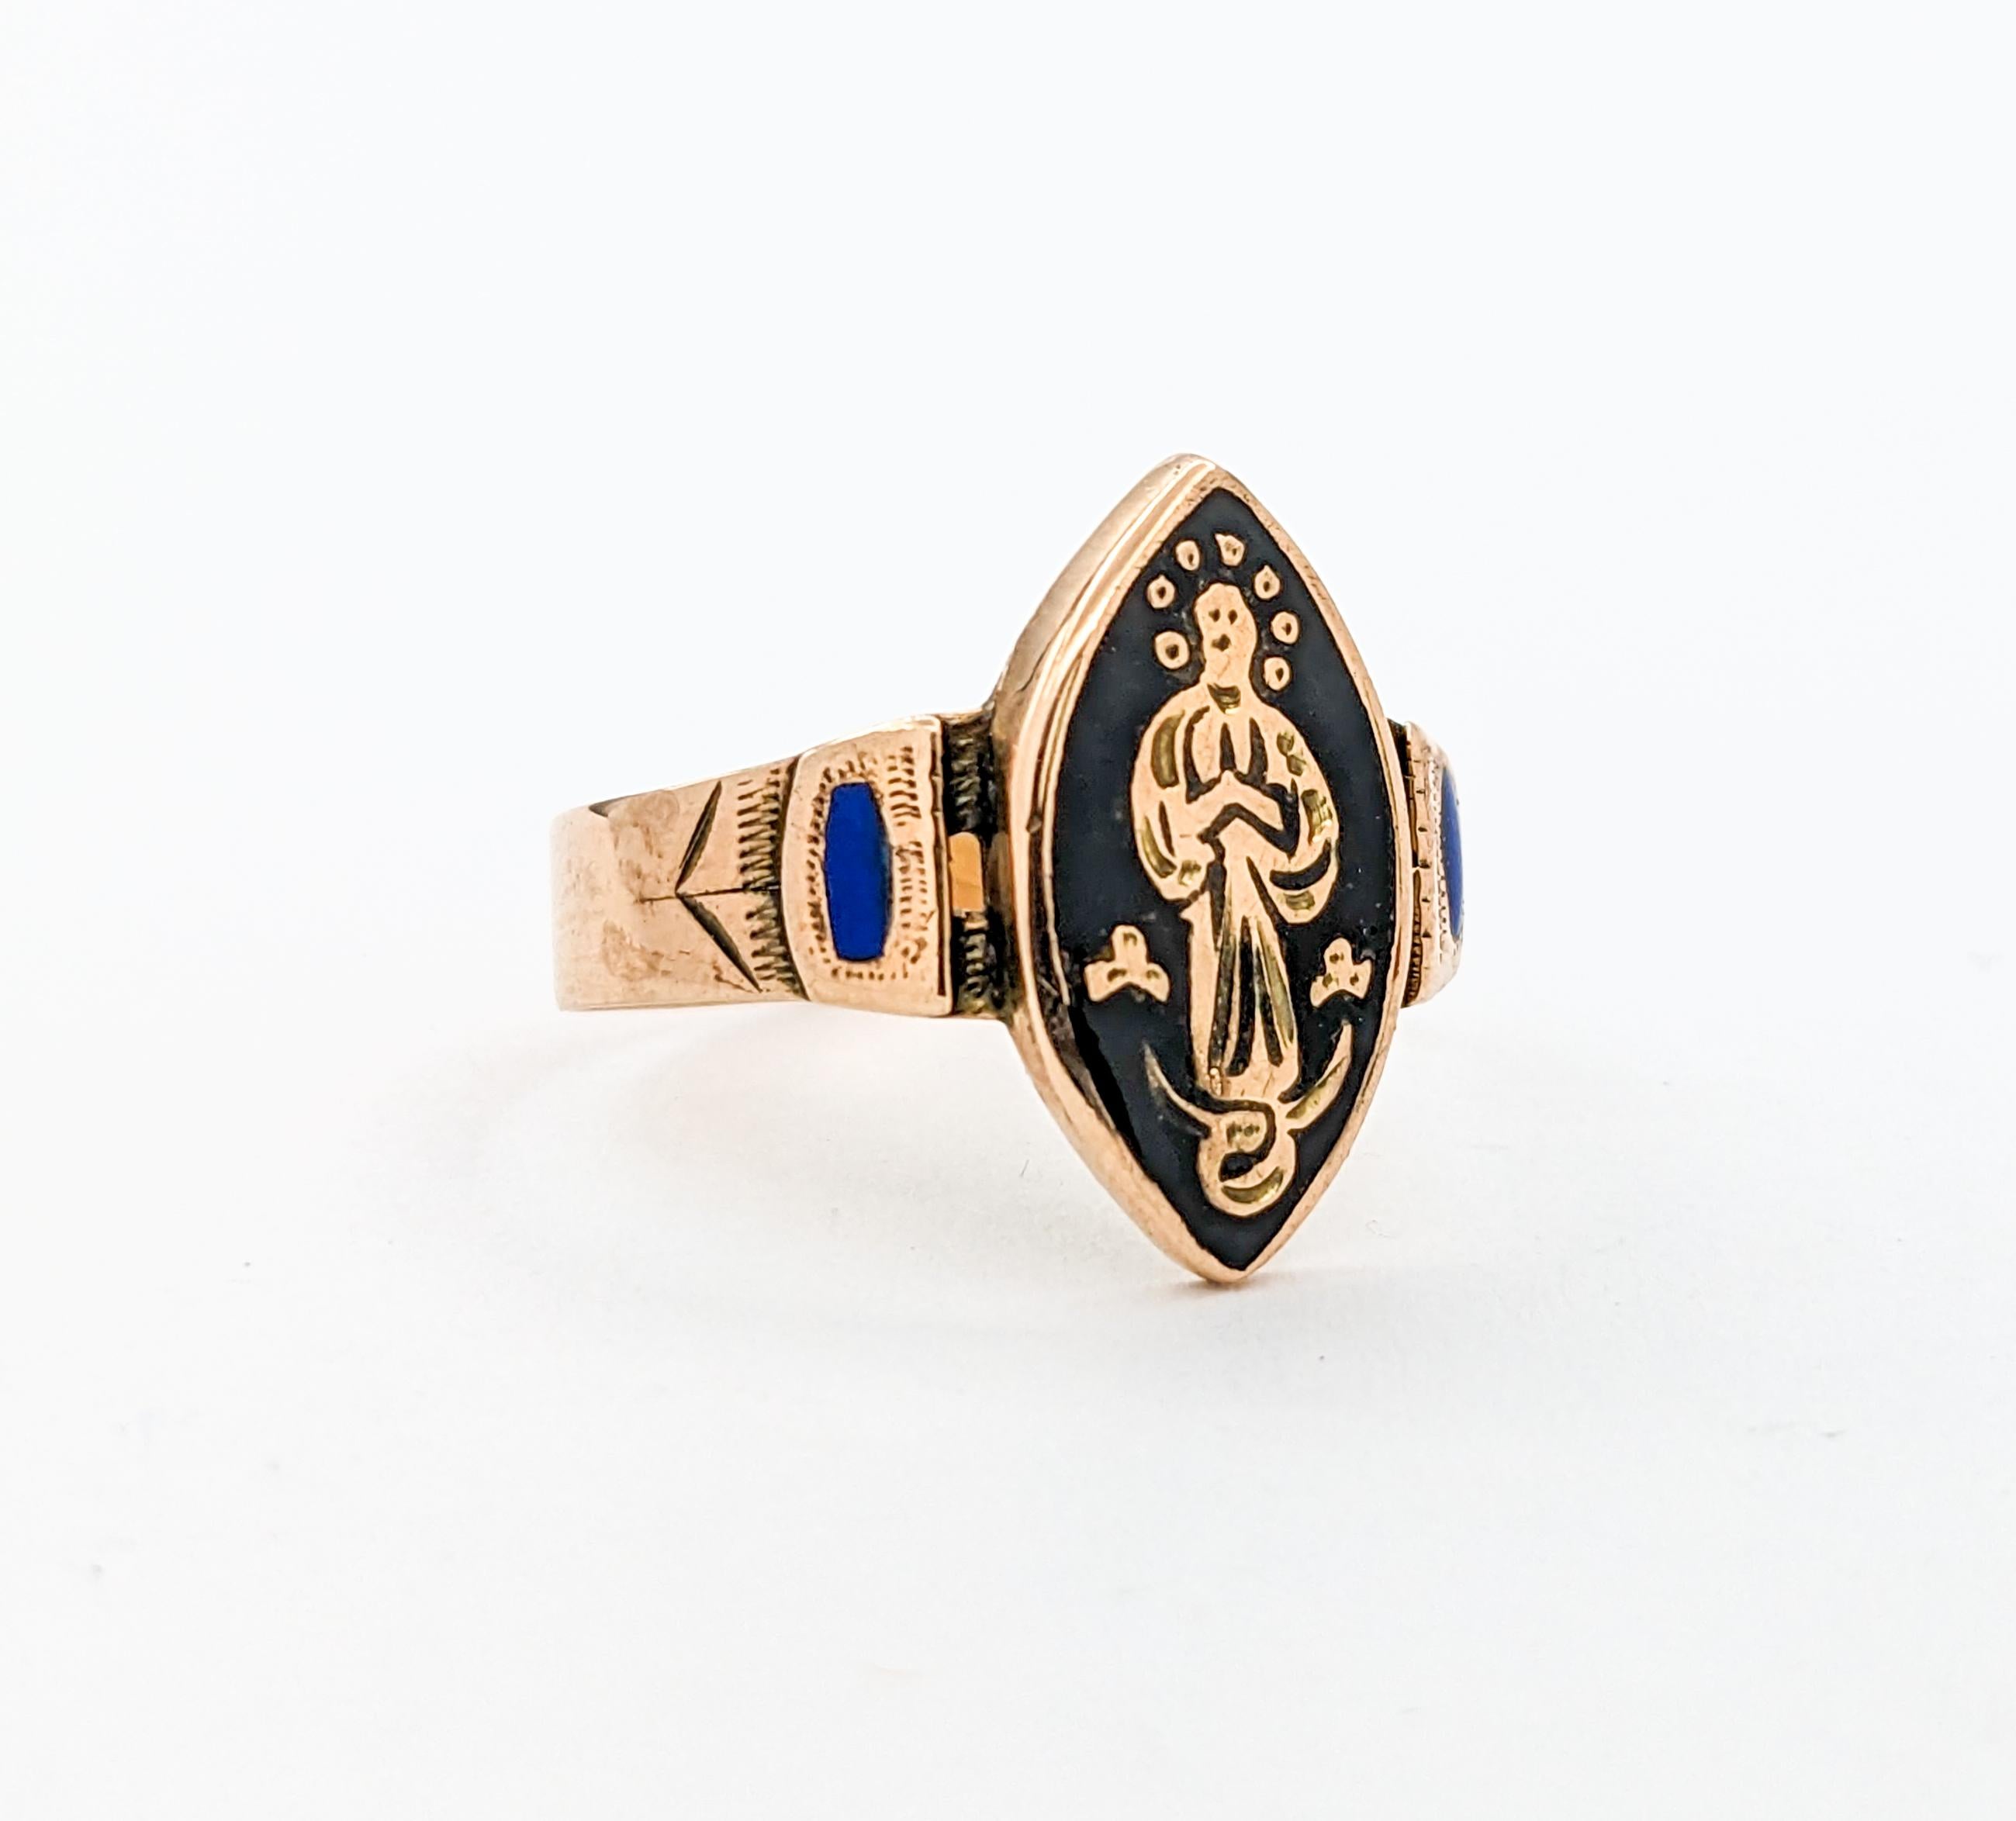 Antique Victorian Black Enamel Religious Saint Ring In Yellow Gold In Excellent Condition For Sale In Bloomington, MN